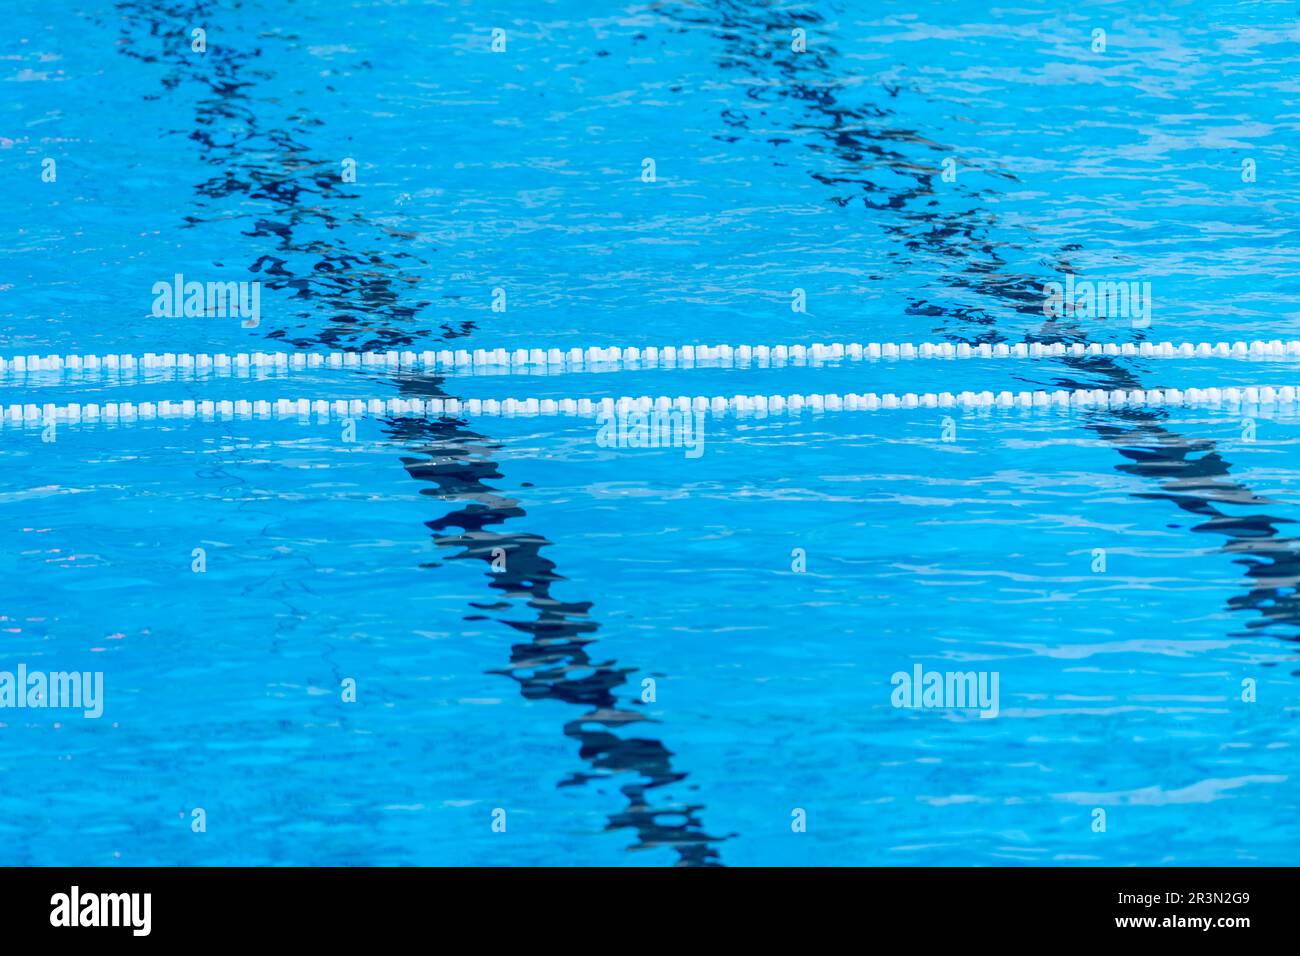 The view of an empty public swimming pool indoors. Lanes of a competition swimming pool. Horizontal sport theme poster, greeting cards, headers, websi Stock Photo